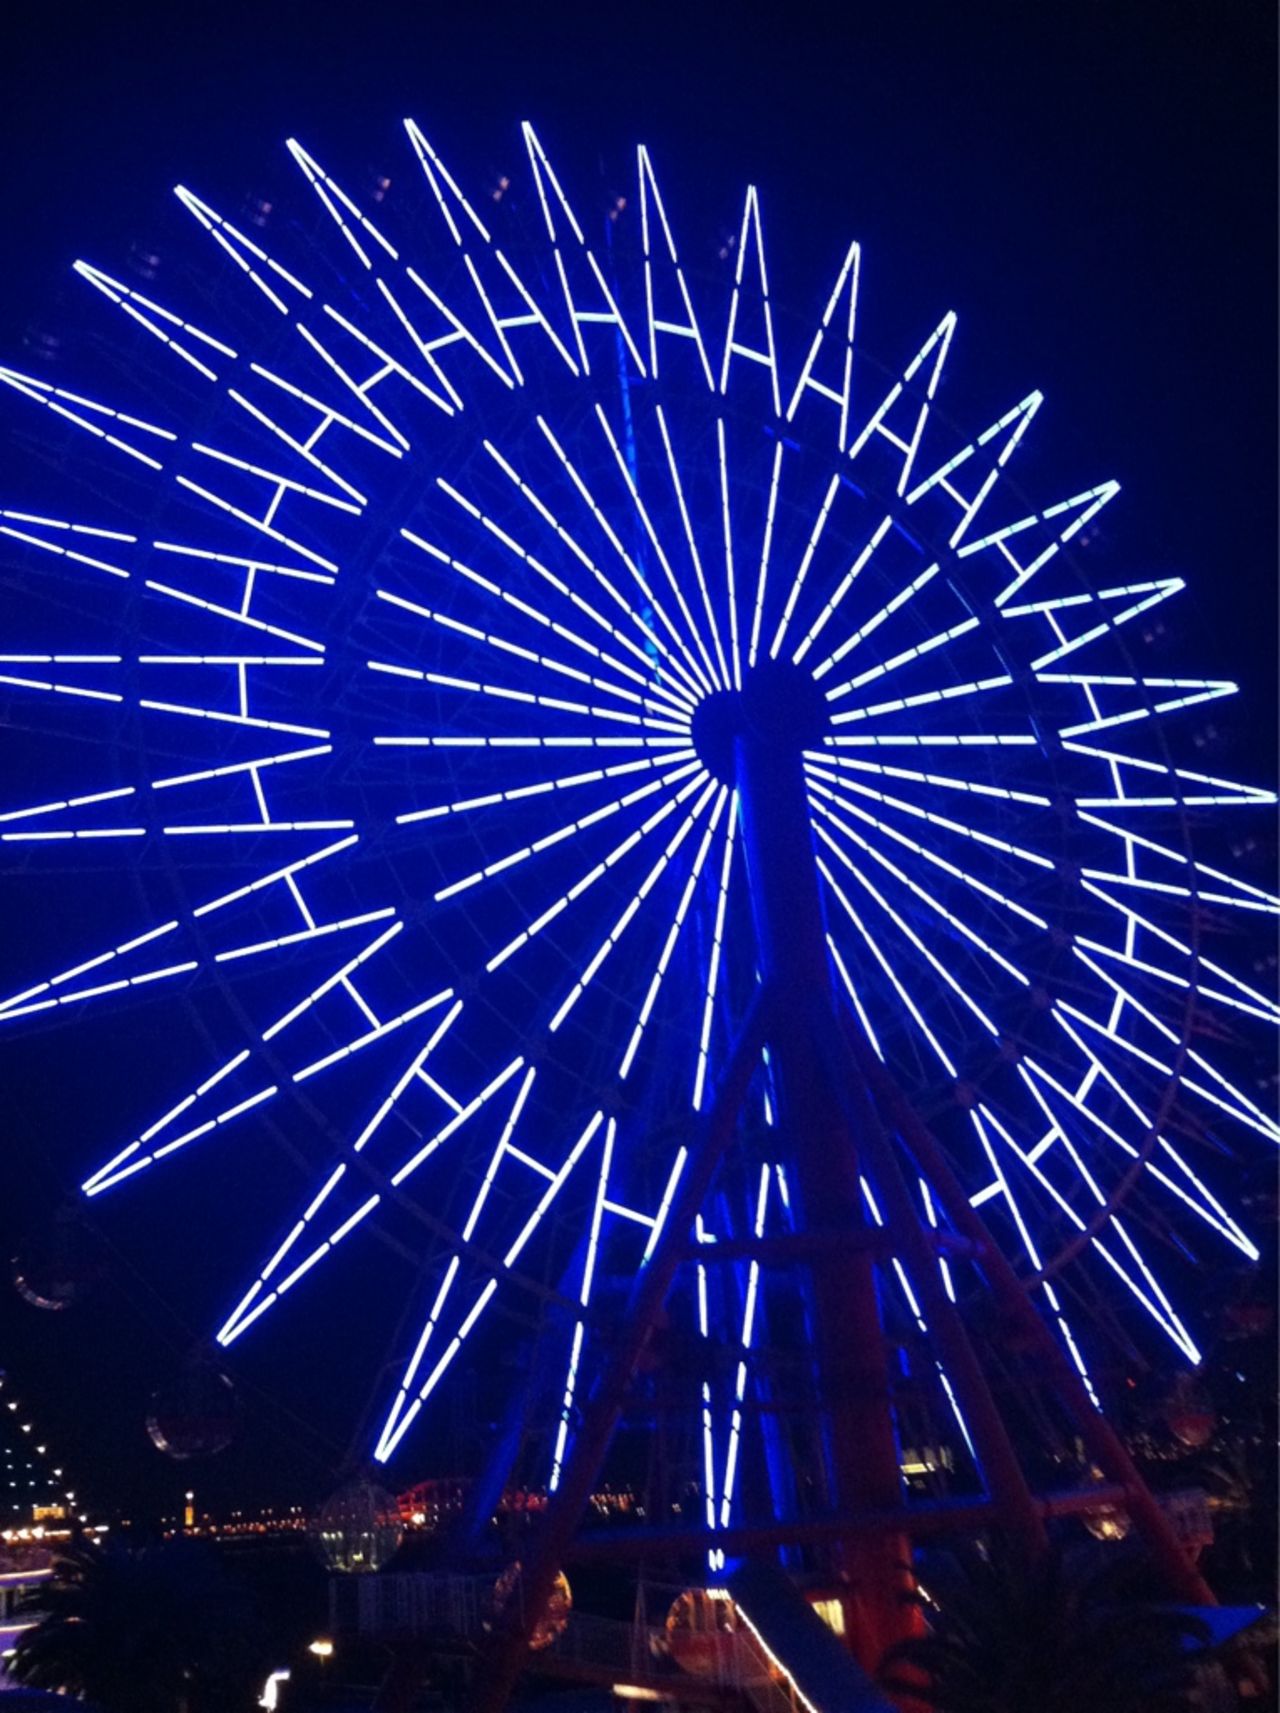 The big Ferris wheel in the Harborland in Kobe, Japan, lights up in 2012 for World Autism Awareness Day.